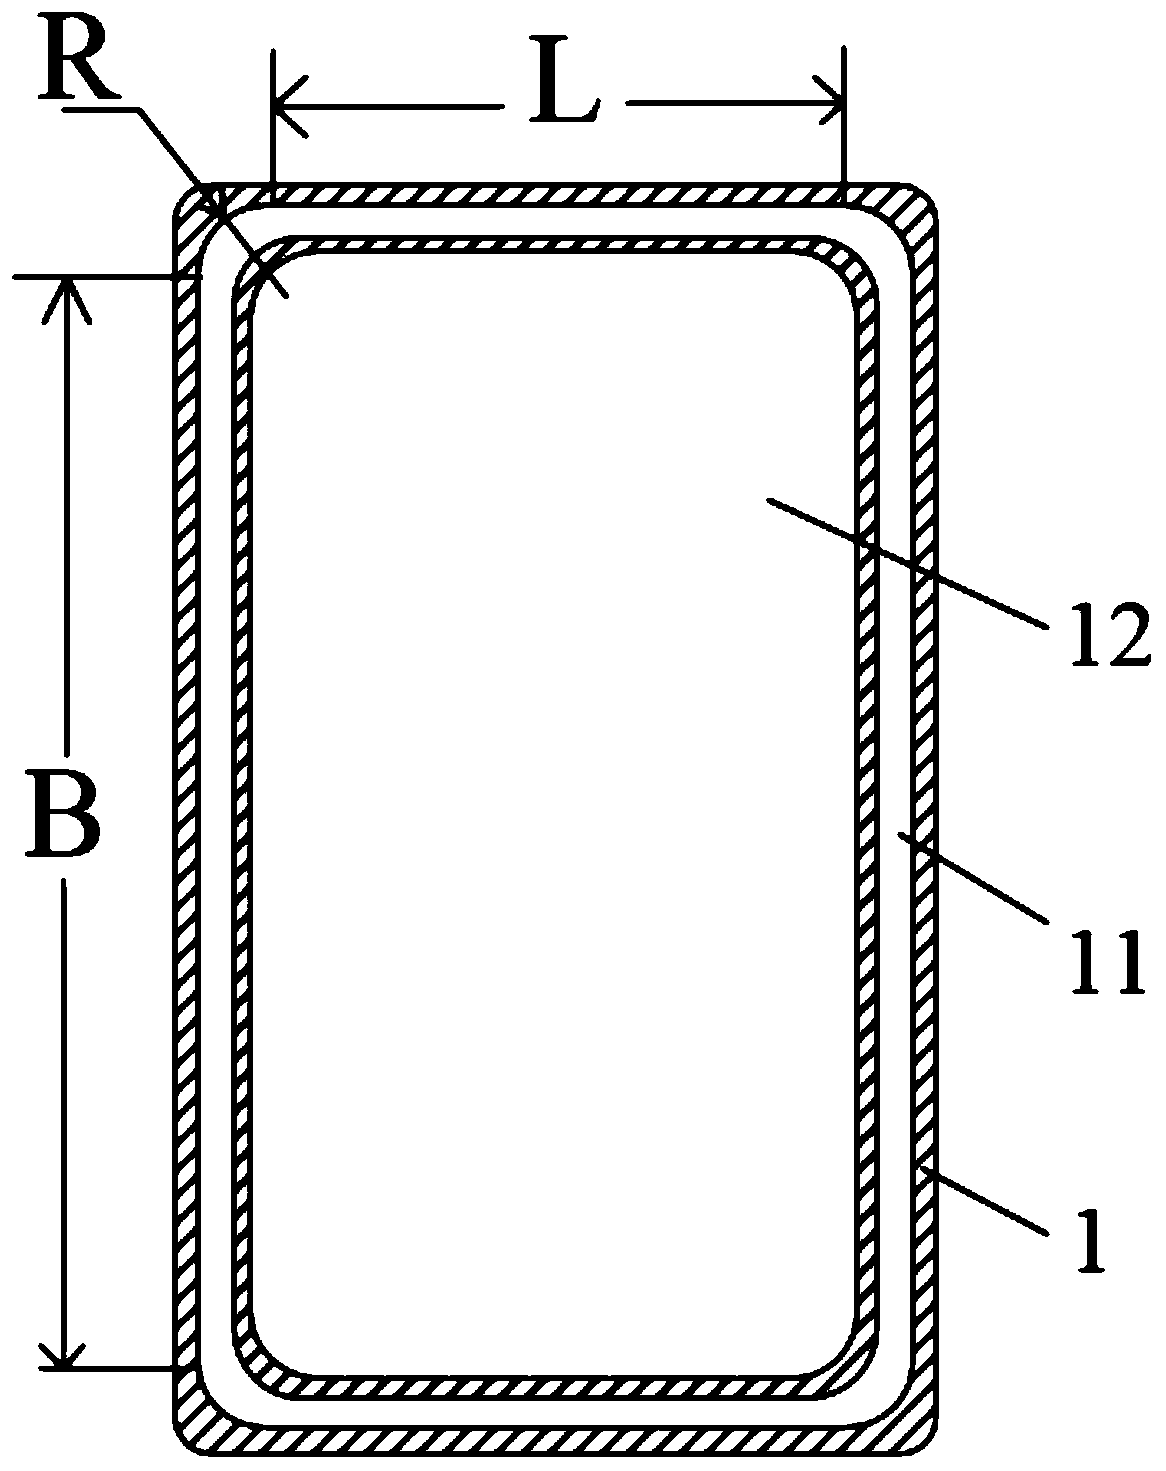 Design method of waterproof sealing structure for vehicle-mounted electronic equipment